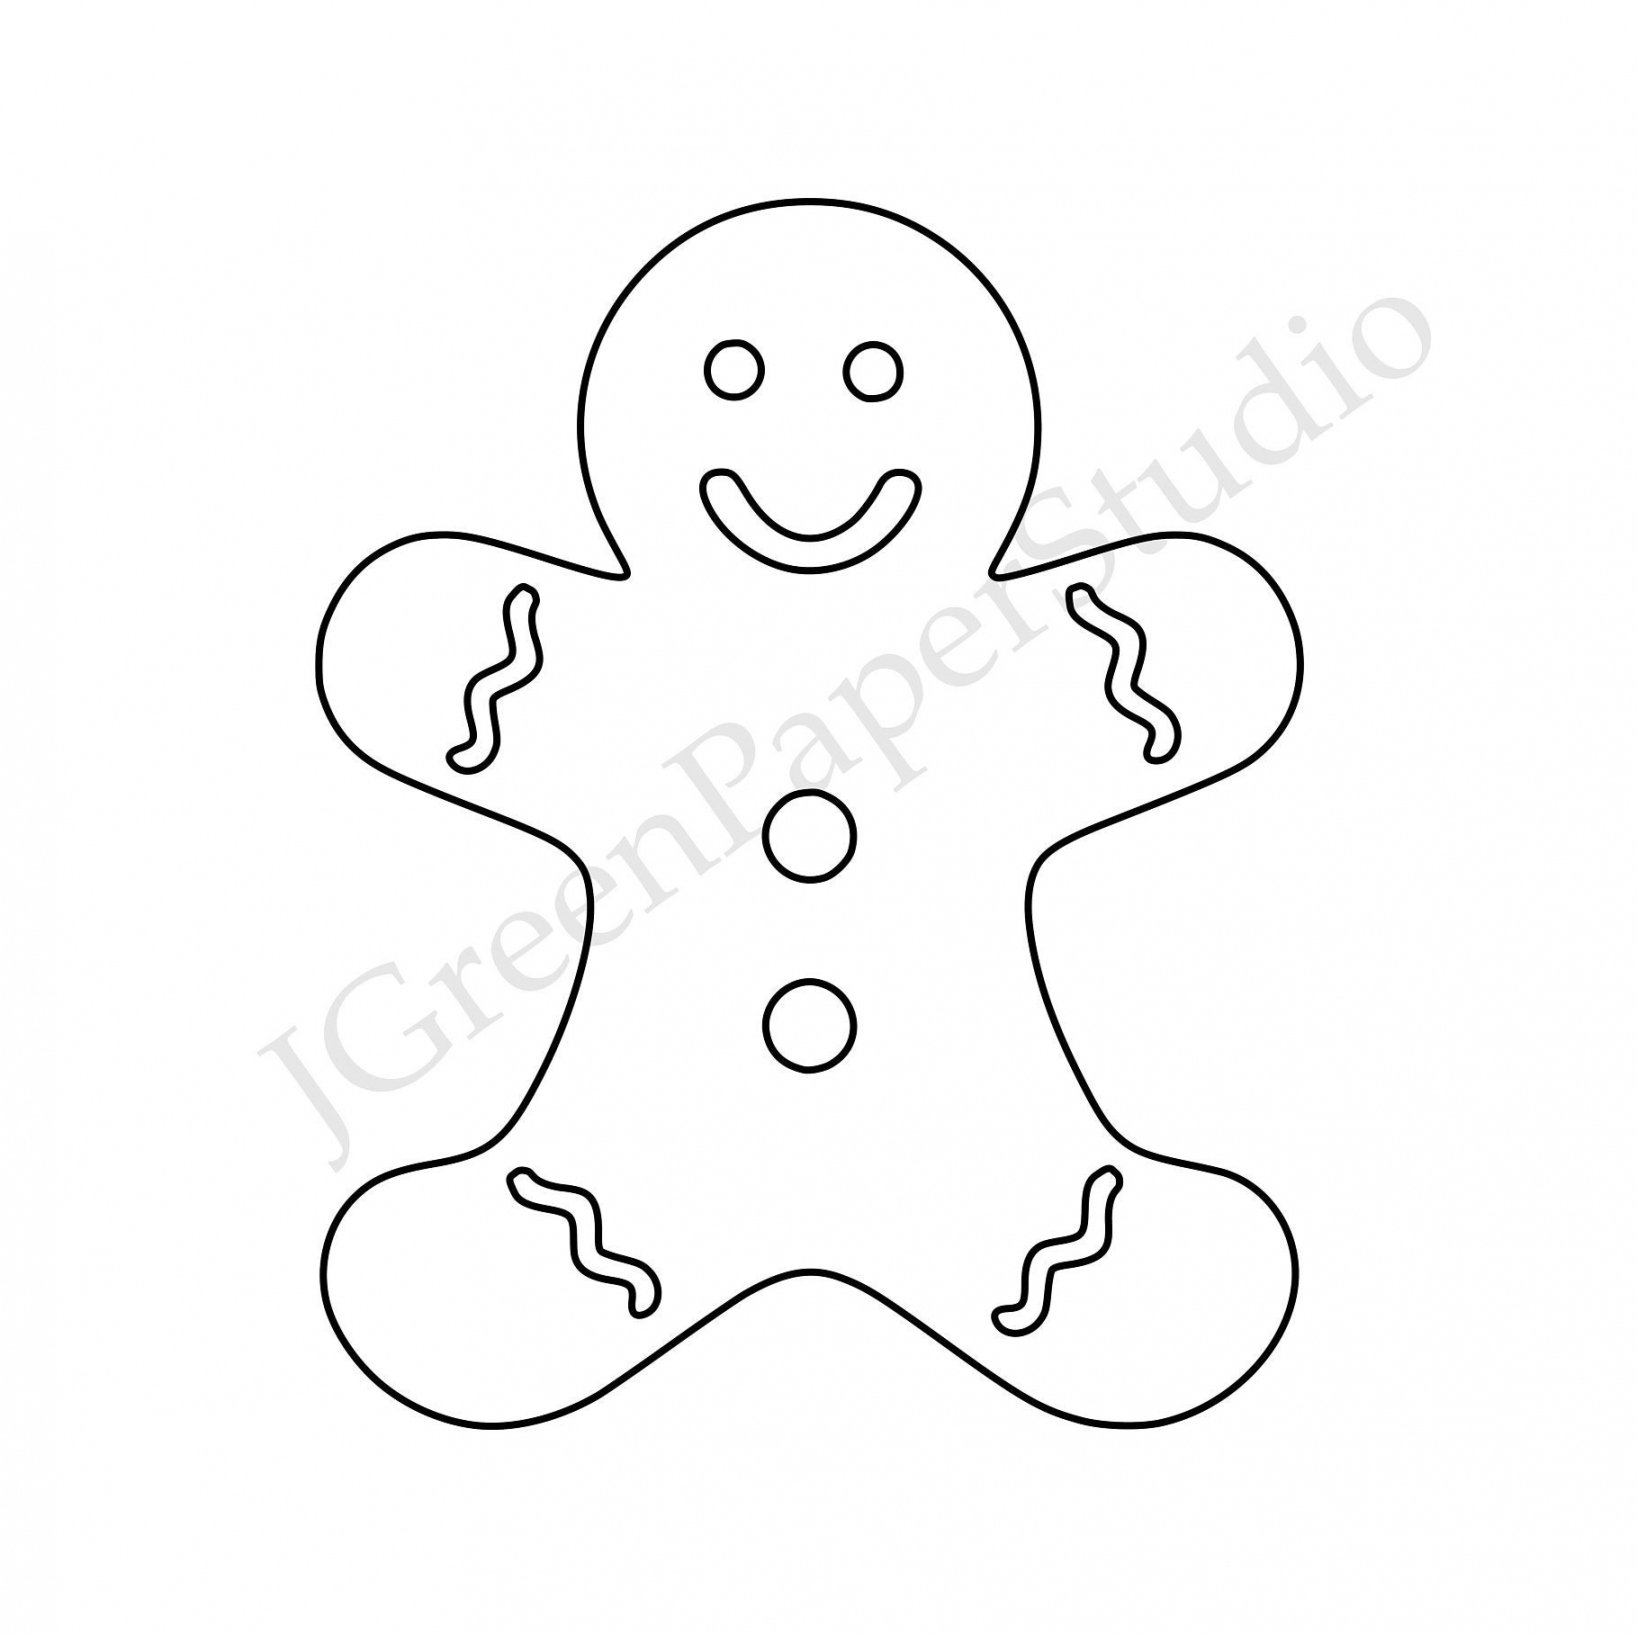 Printable Gingerbread Man Template-PDF Digital Download Cookie Kids Holiday  Coloring Page Kids Craft Stencil -inch Gingerbread Scrapbooking - FREE Printables - Gingerbread Man Stencil